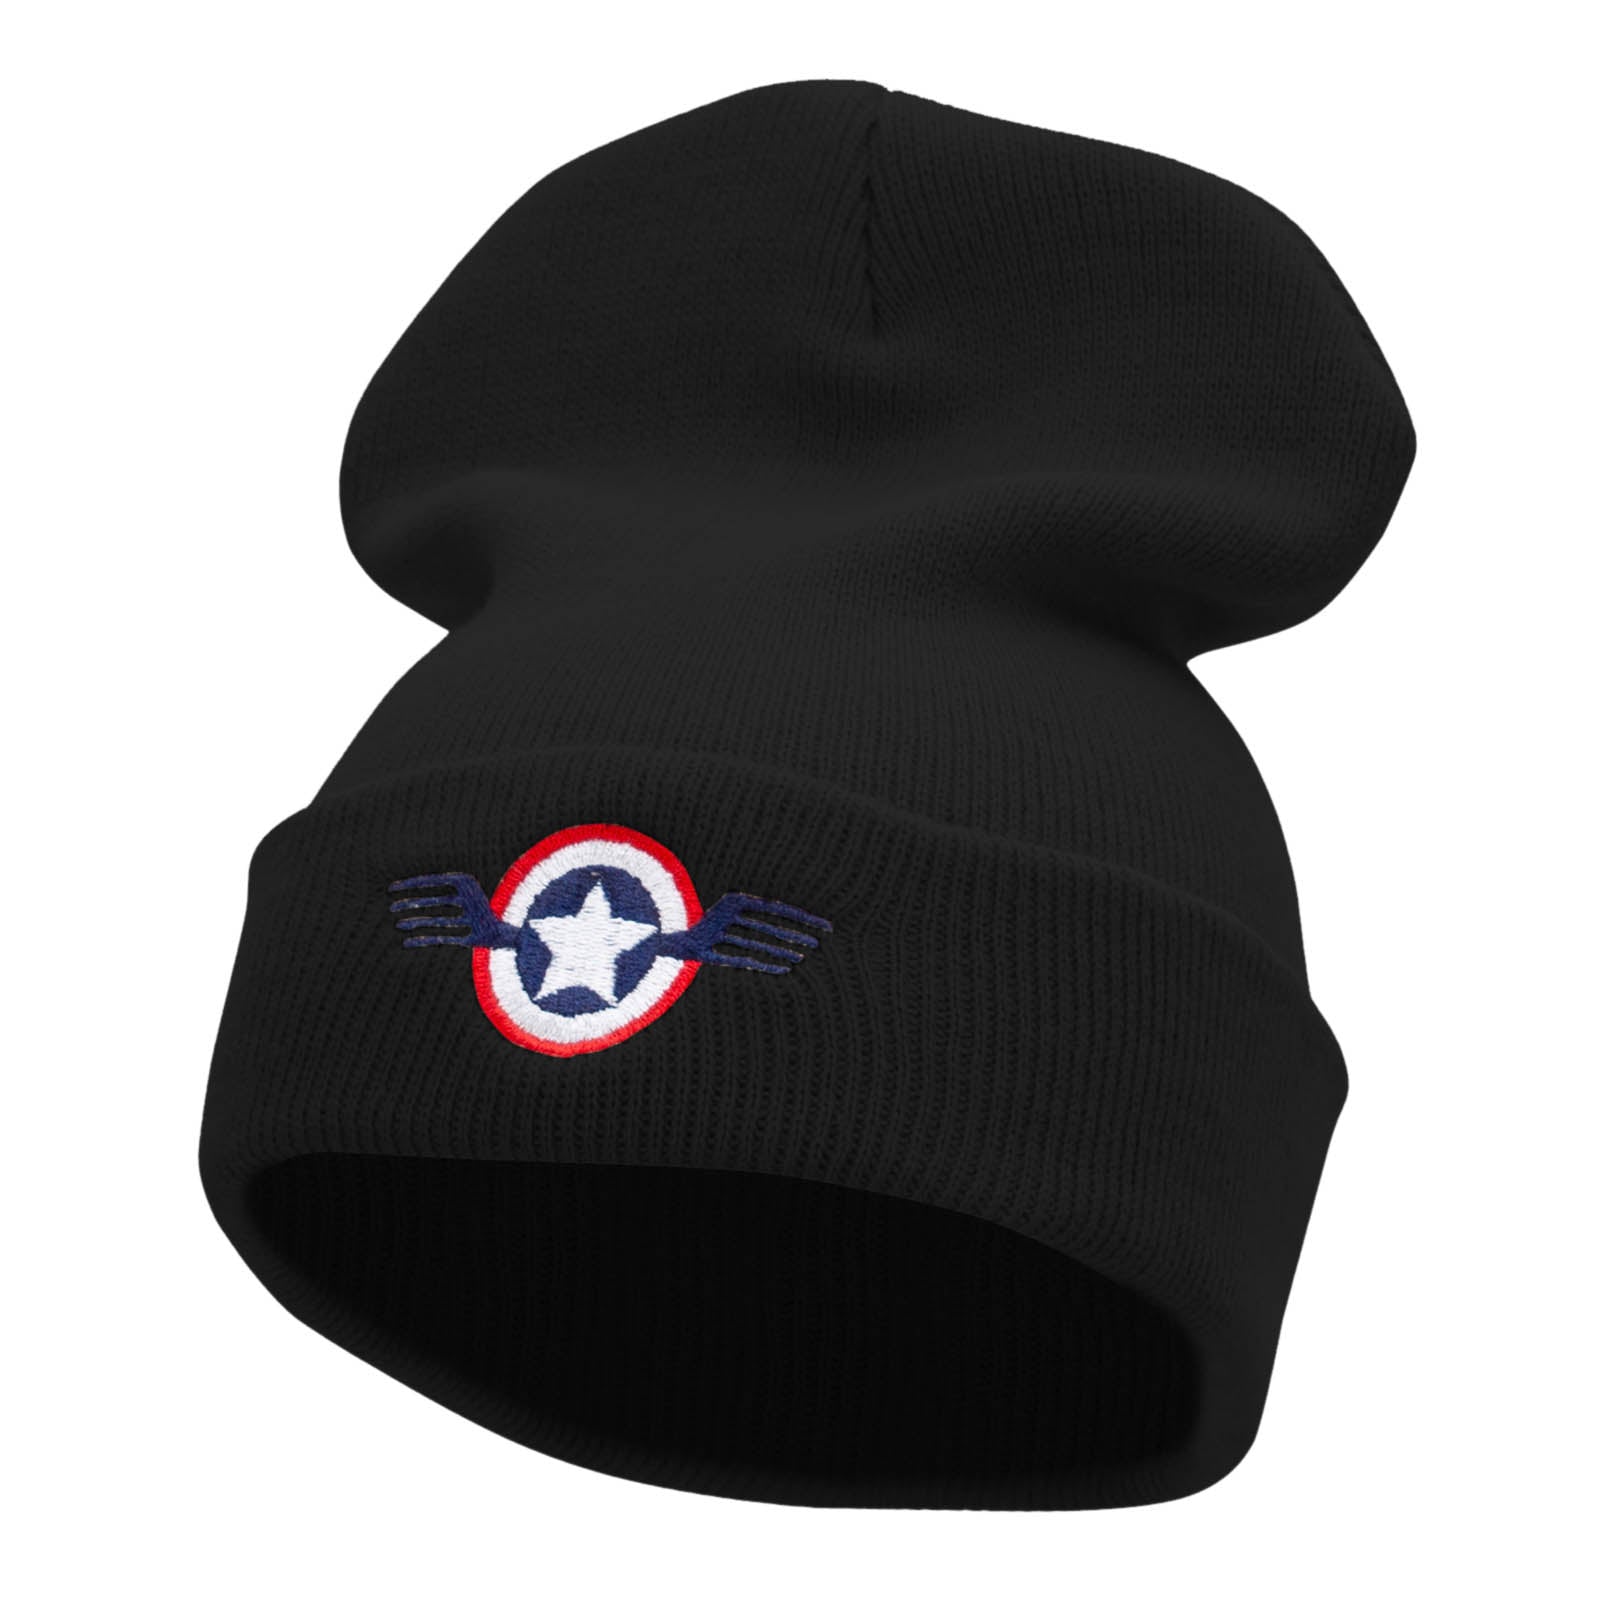 Flying USA Seal Embroidered 12 Inch Solid Long Beanie Made in USA - Black OSFM